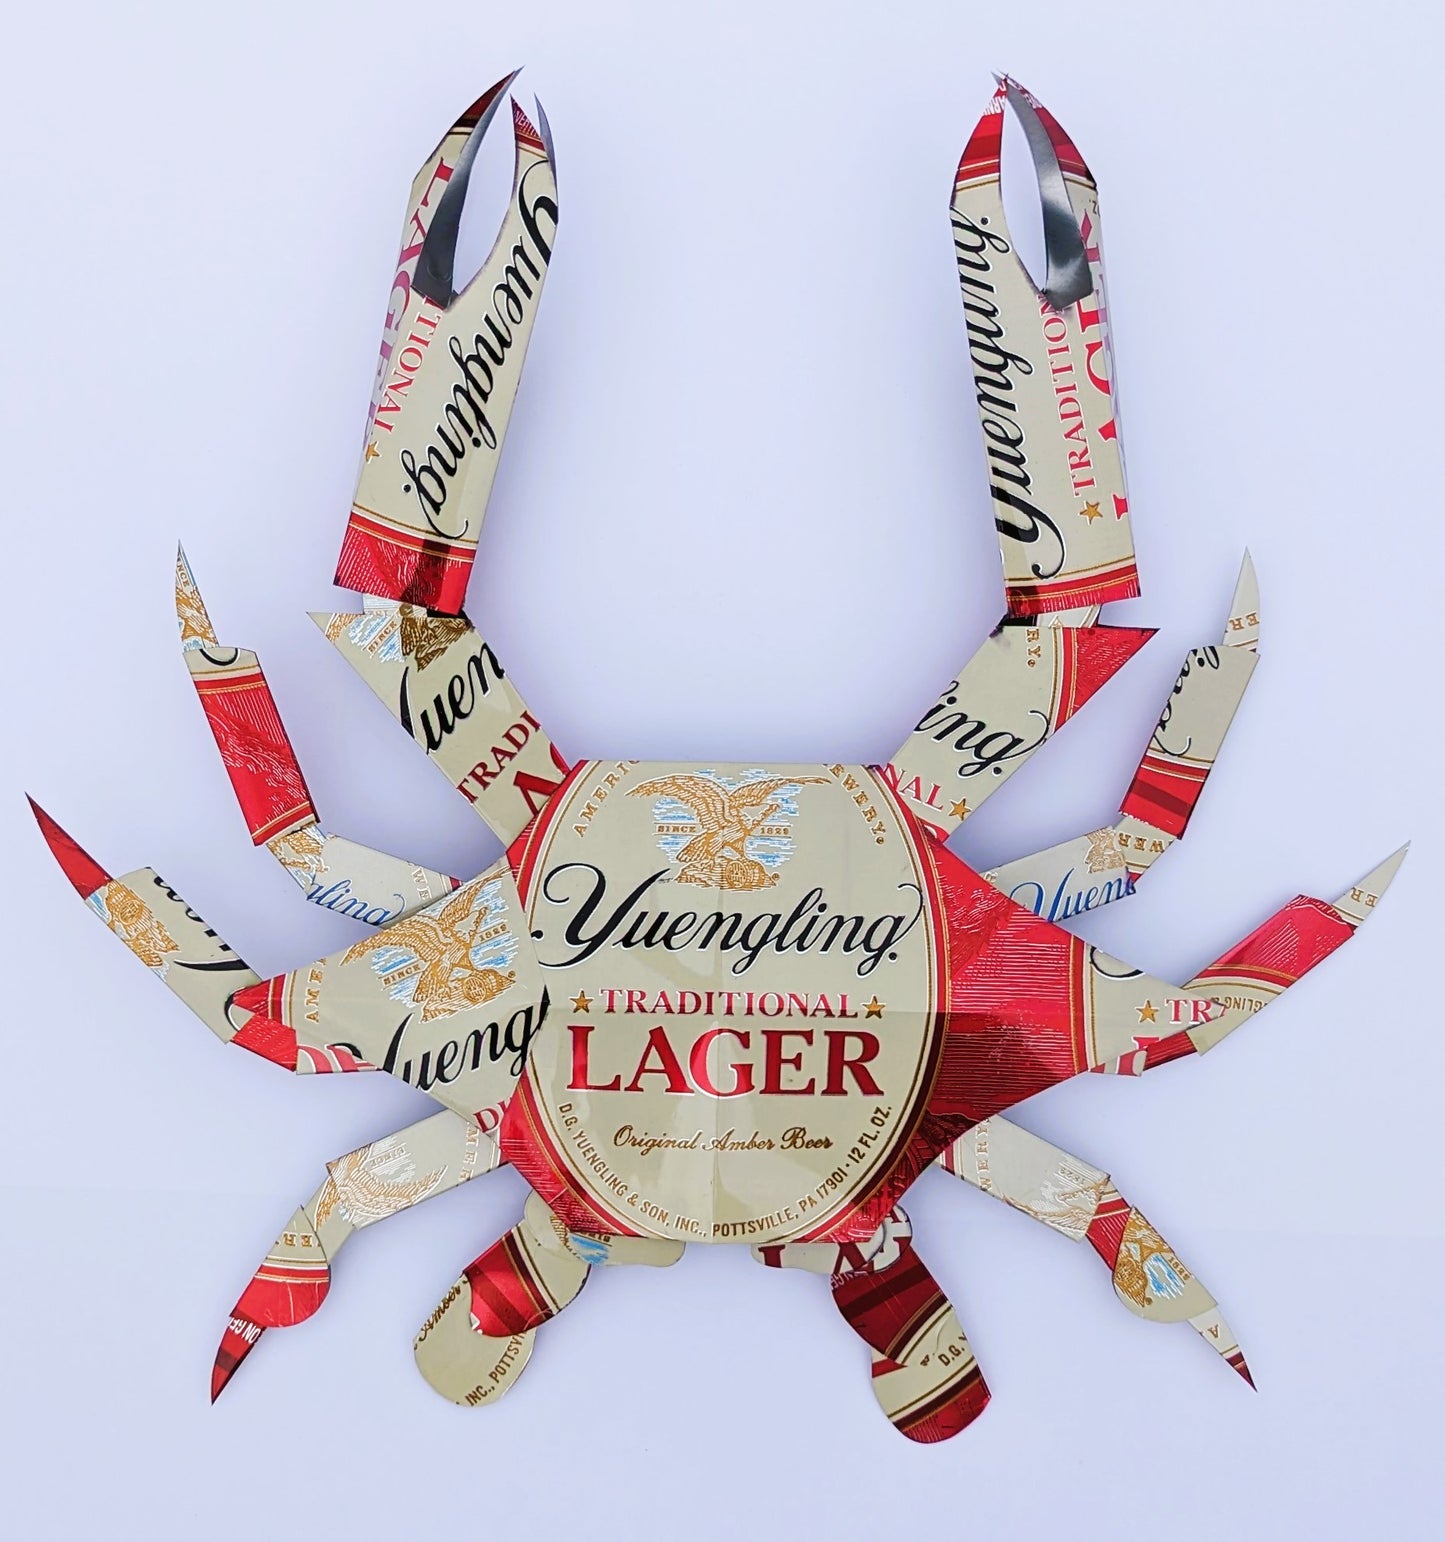 Yuengling Beer can crab